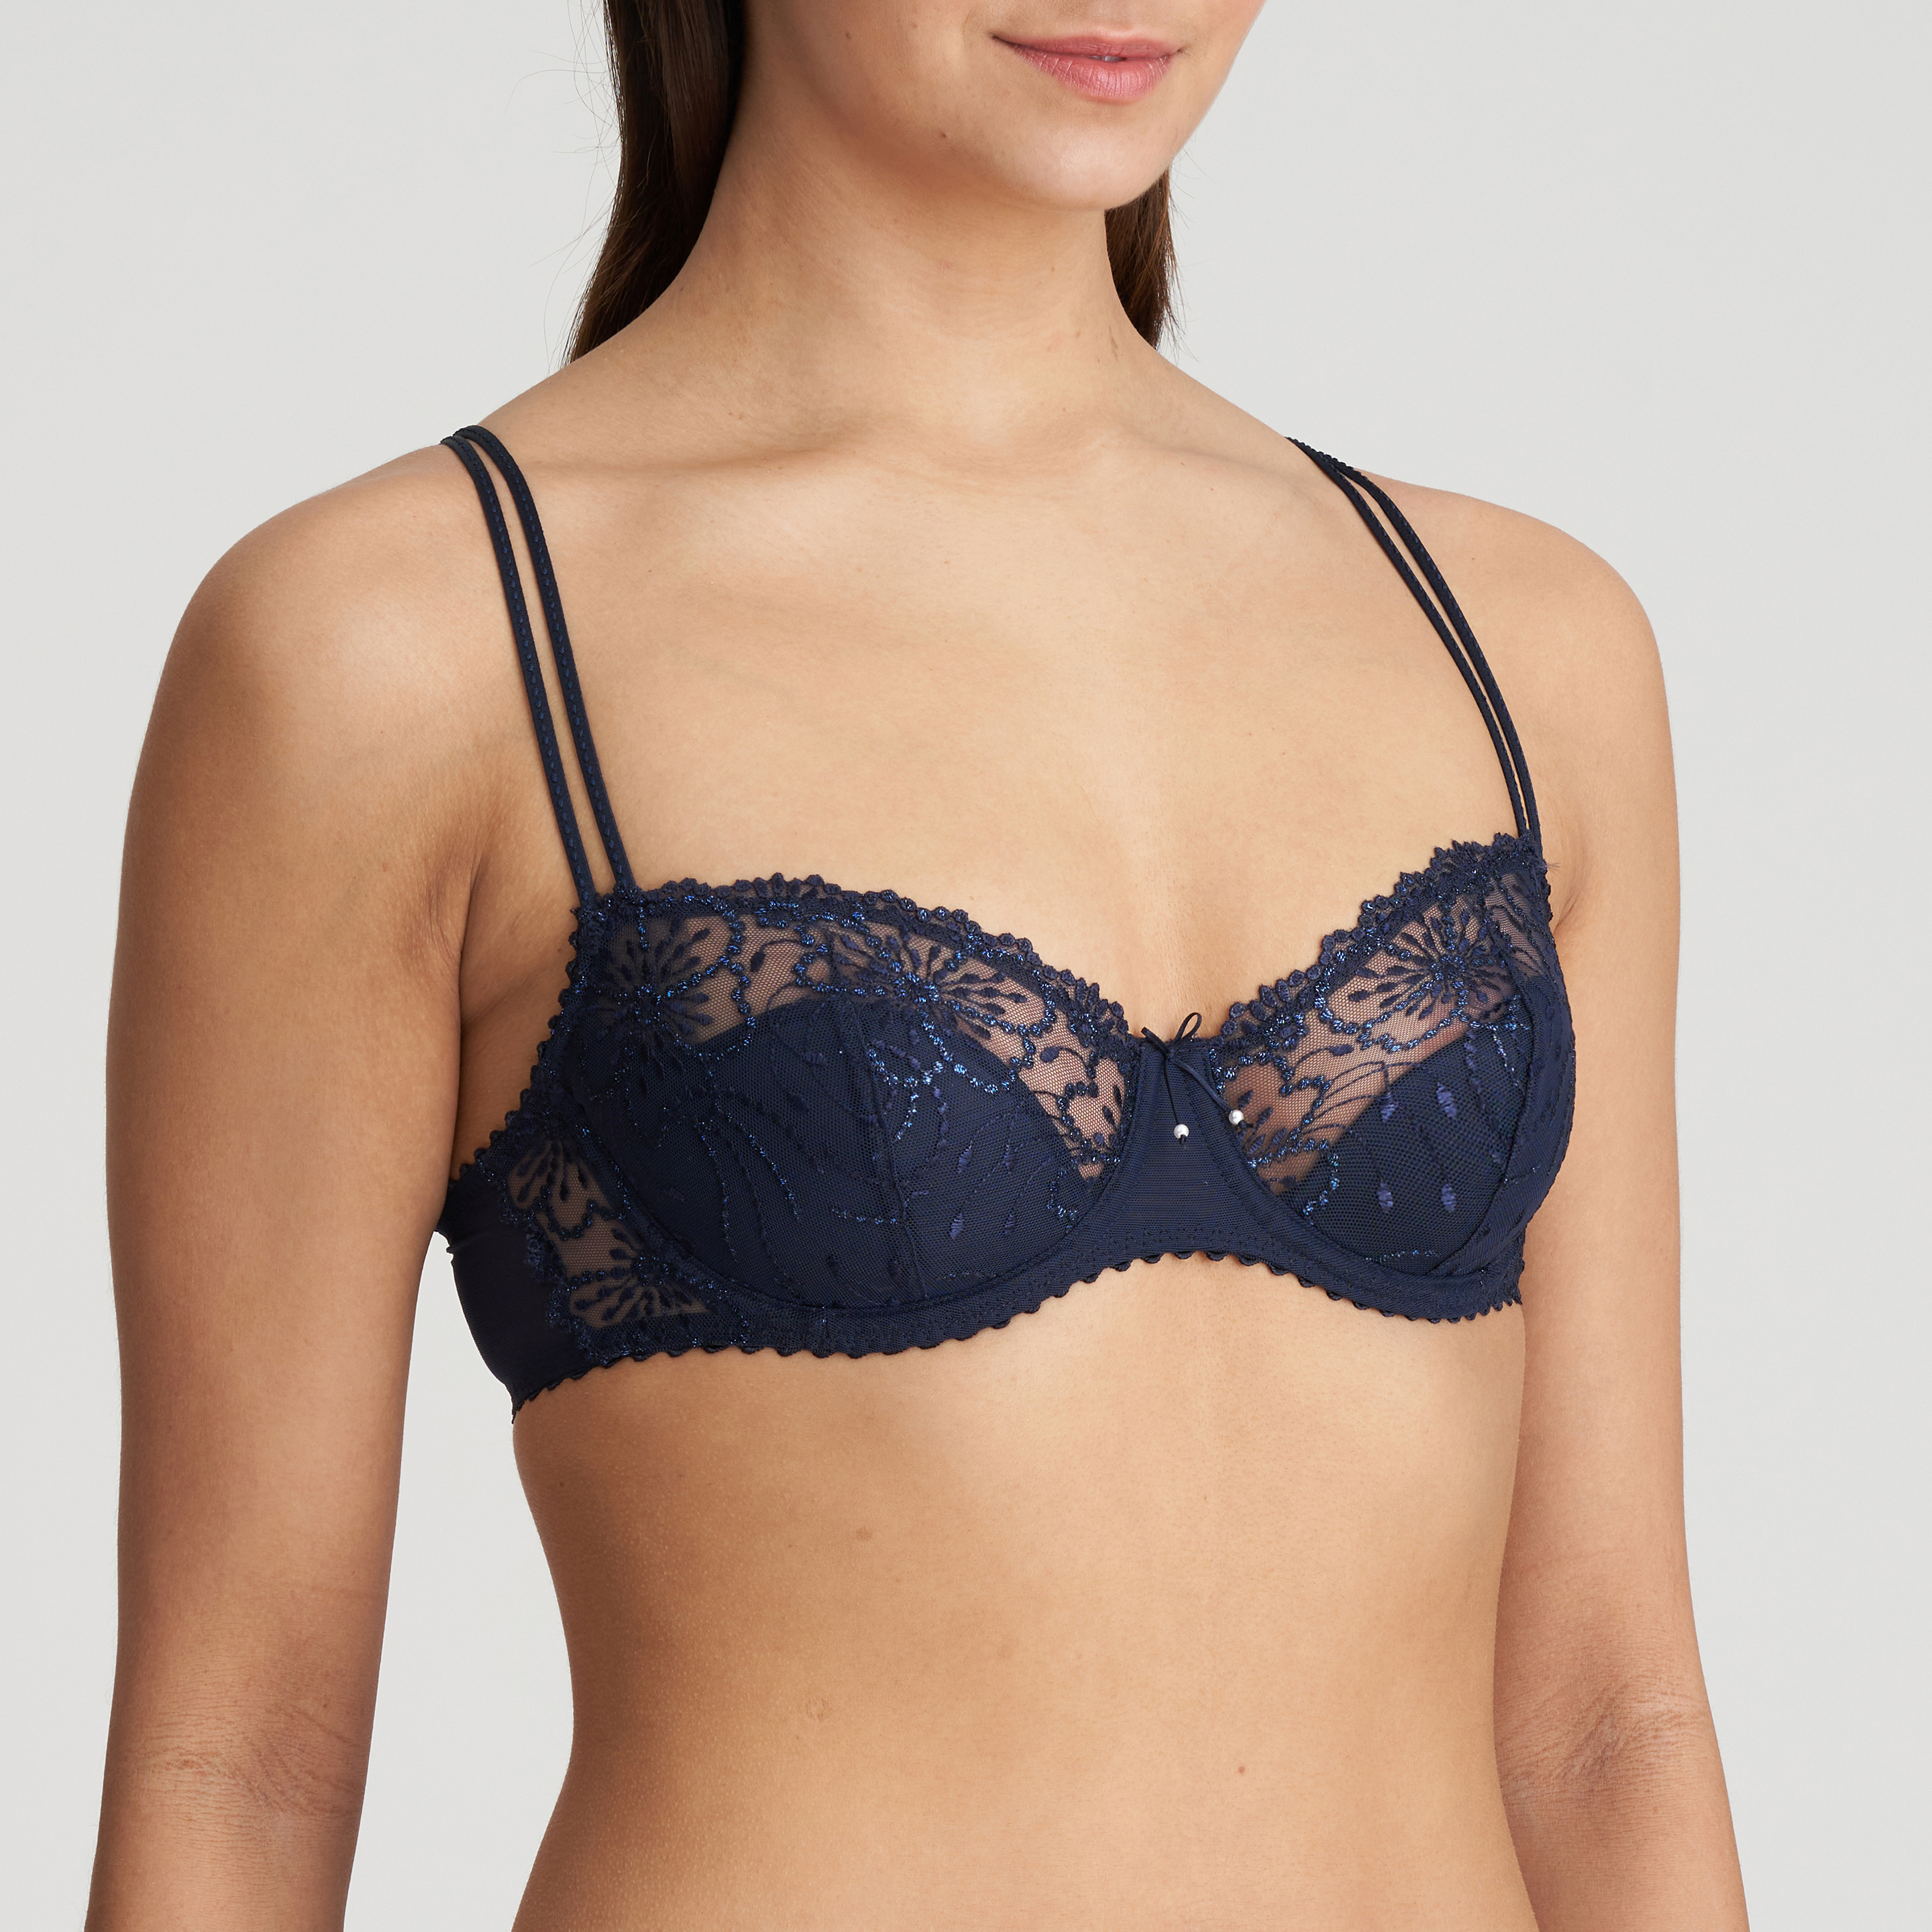 Iya Oni Pant And Bra - Entice by George balcony bra is on sale for half  price. It's a packer, take it.